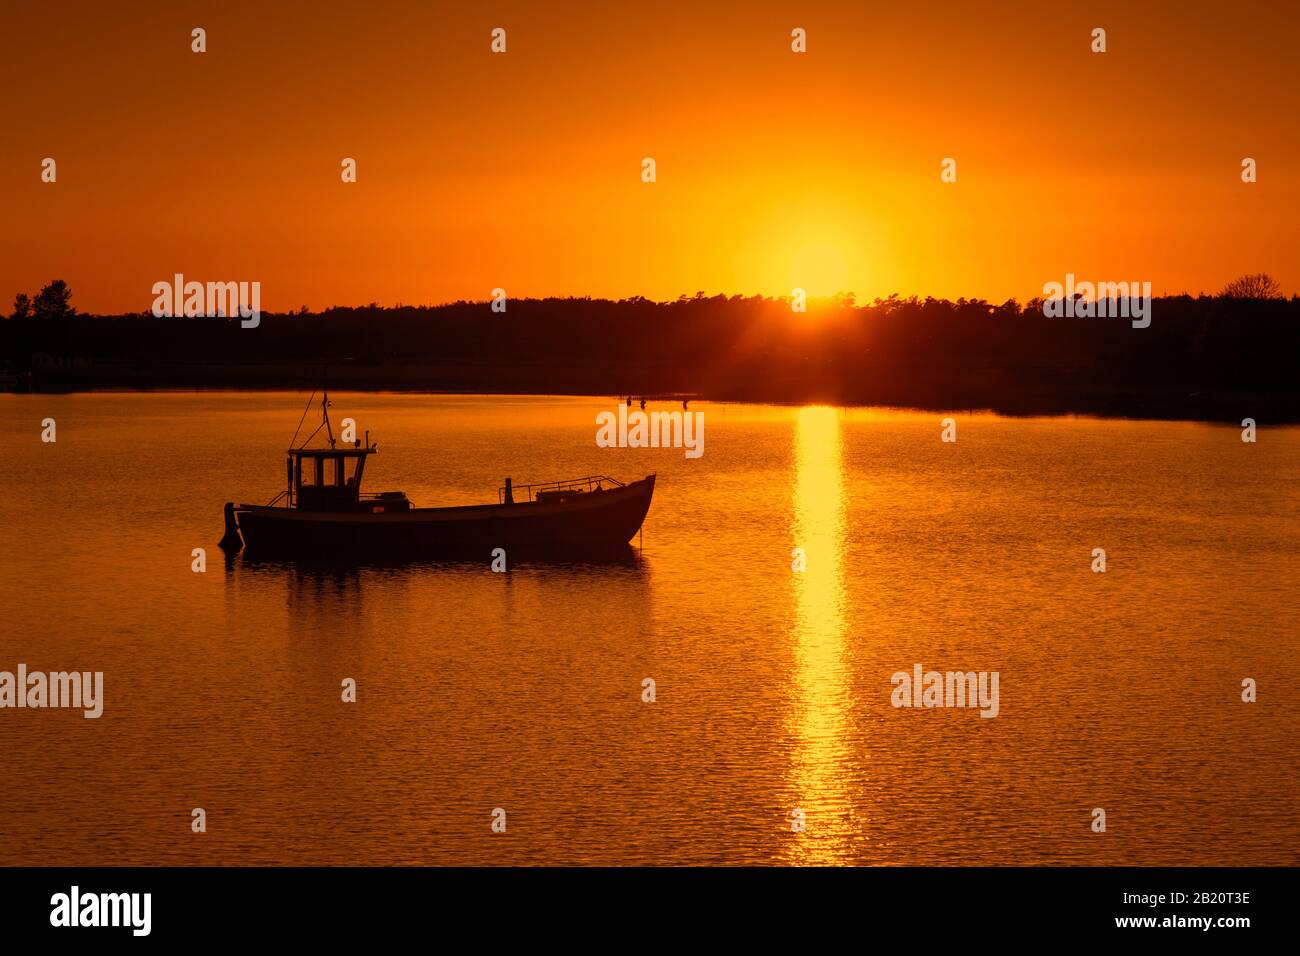 Fishing boat silhouetted against sunset, island of Ummanz, municipality in the Vorpommern-Rügen district in Mecklenburg-Vorpommern, Germany Stock Photo